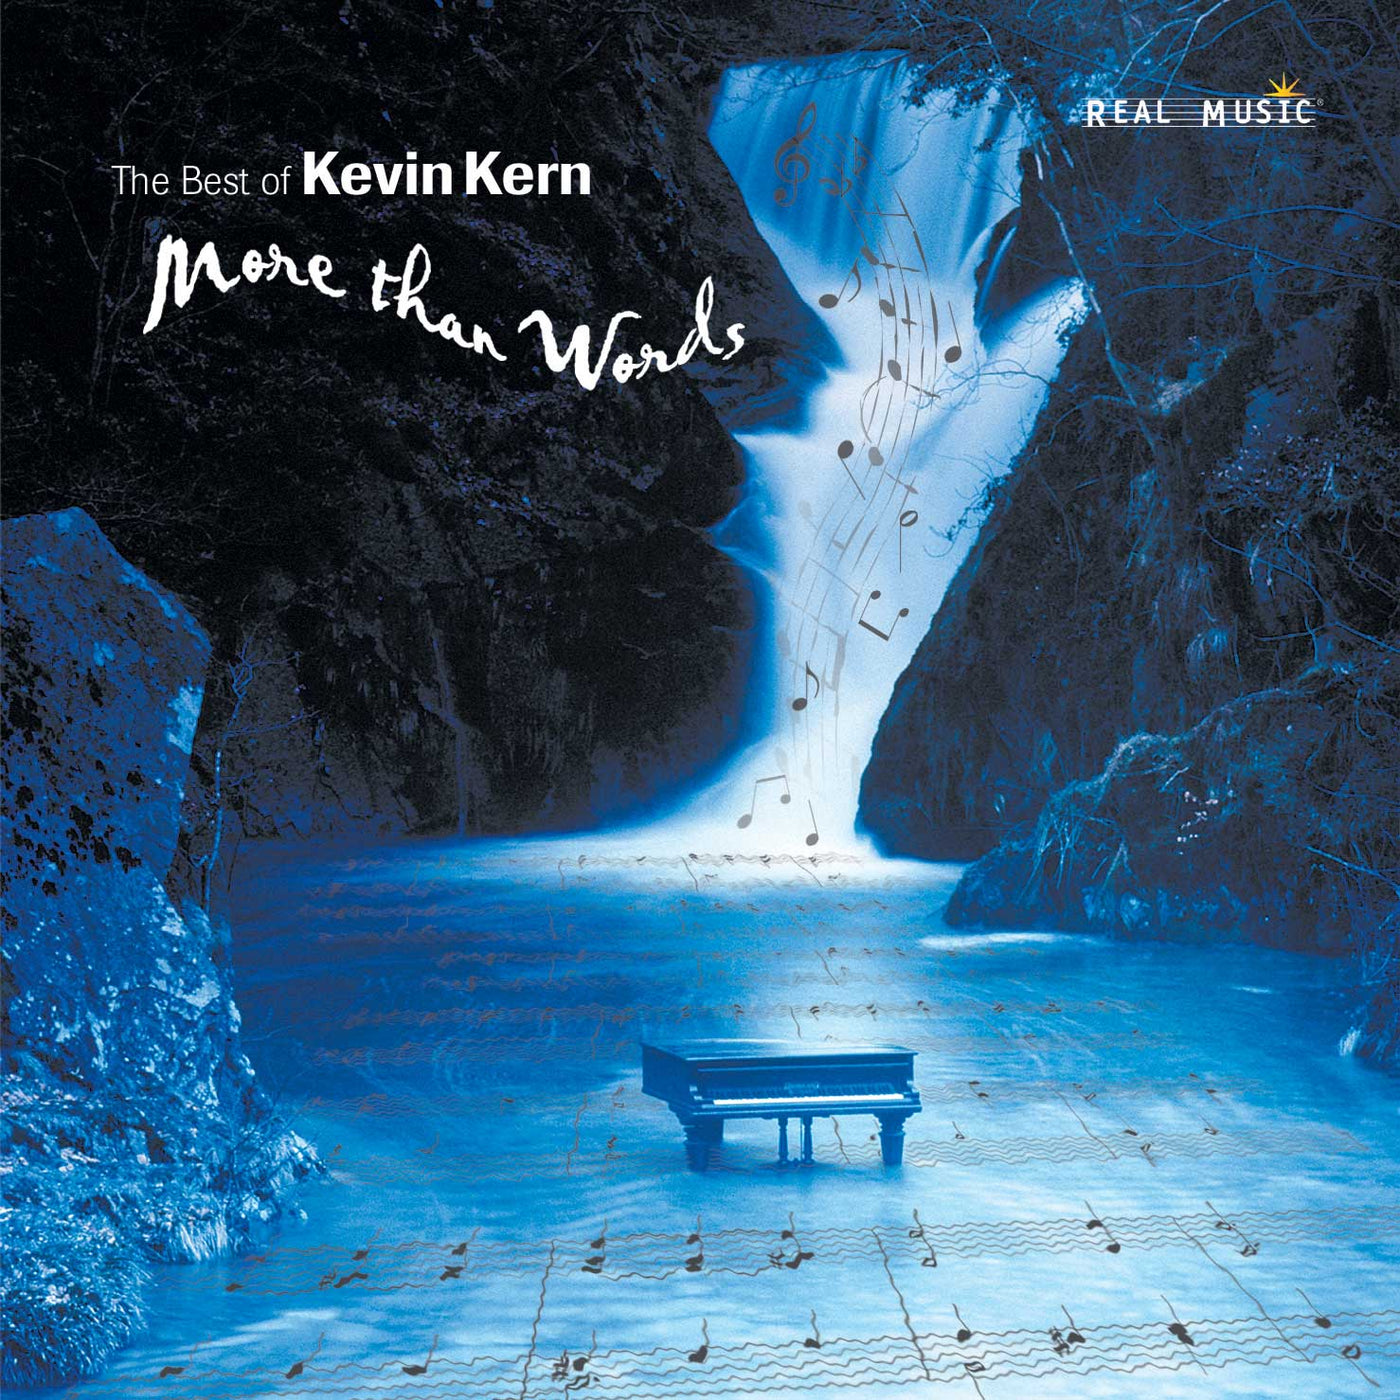 More Than Words: The Best of Kevin Kern, cd cover art.